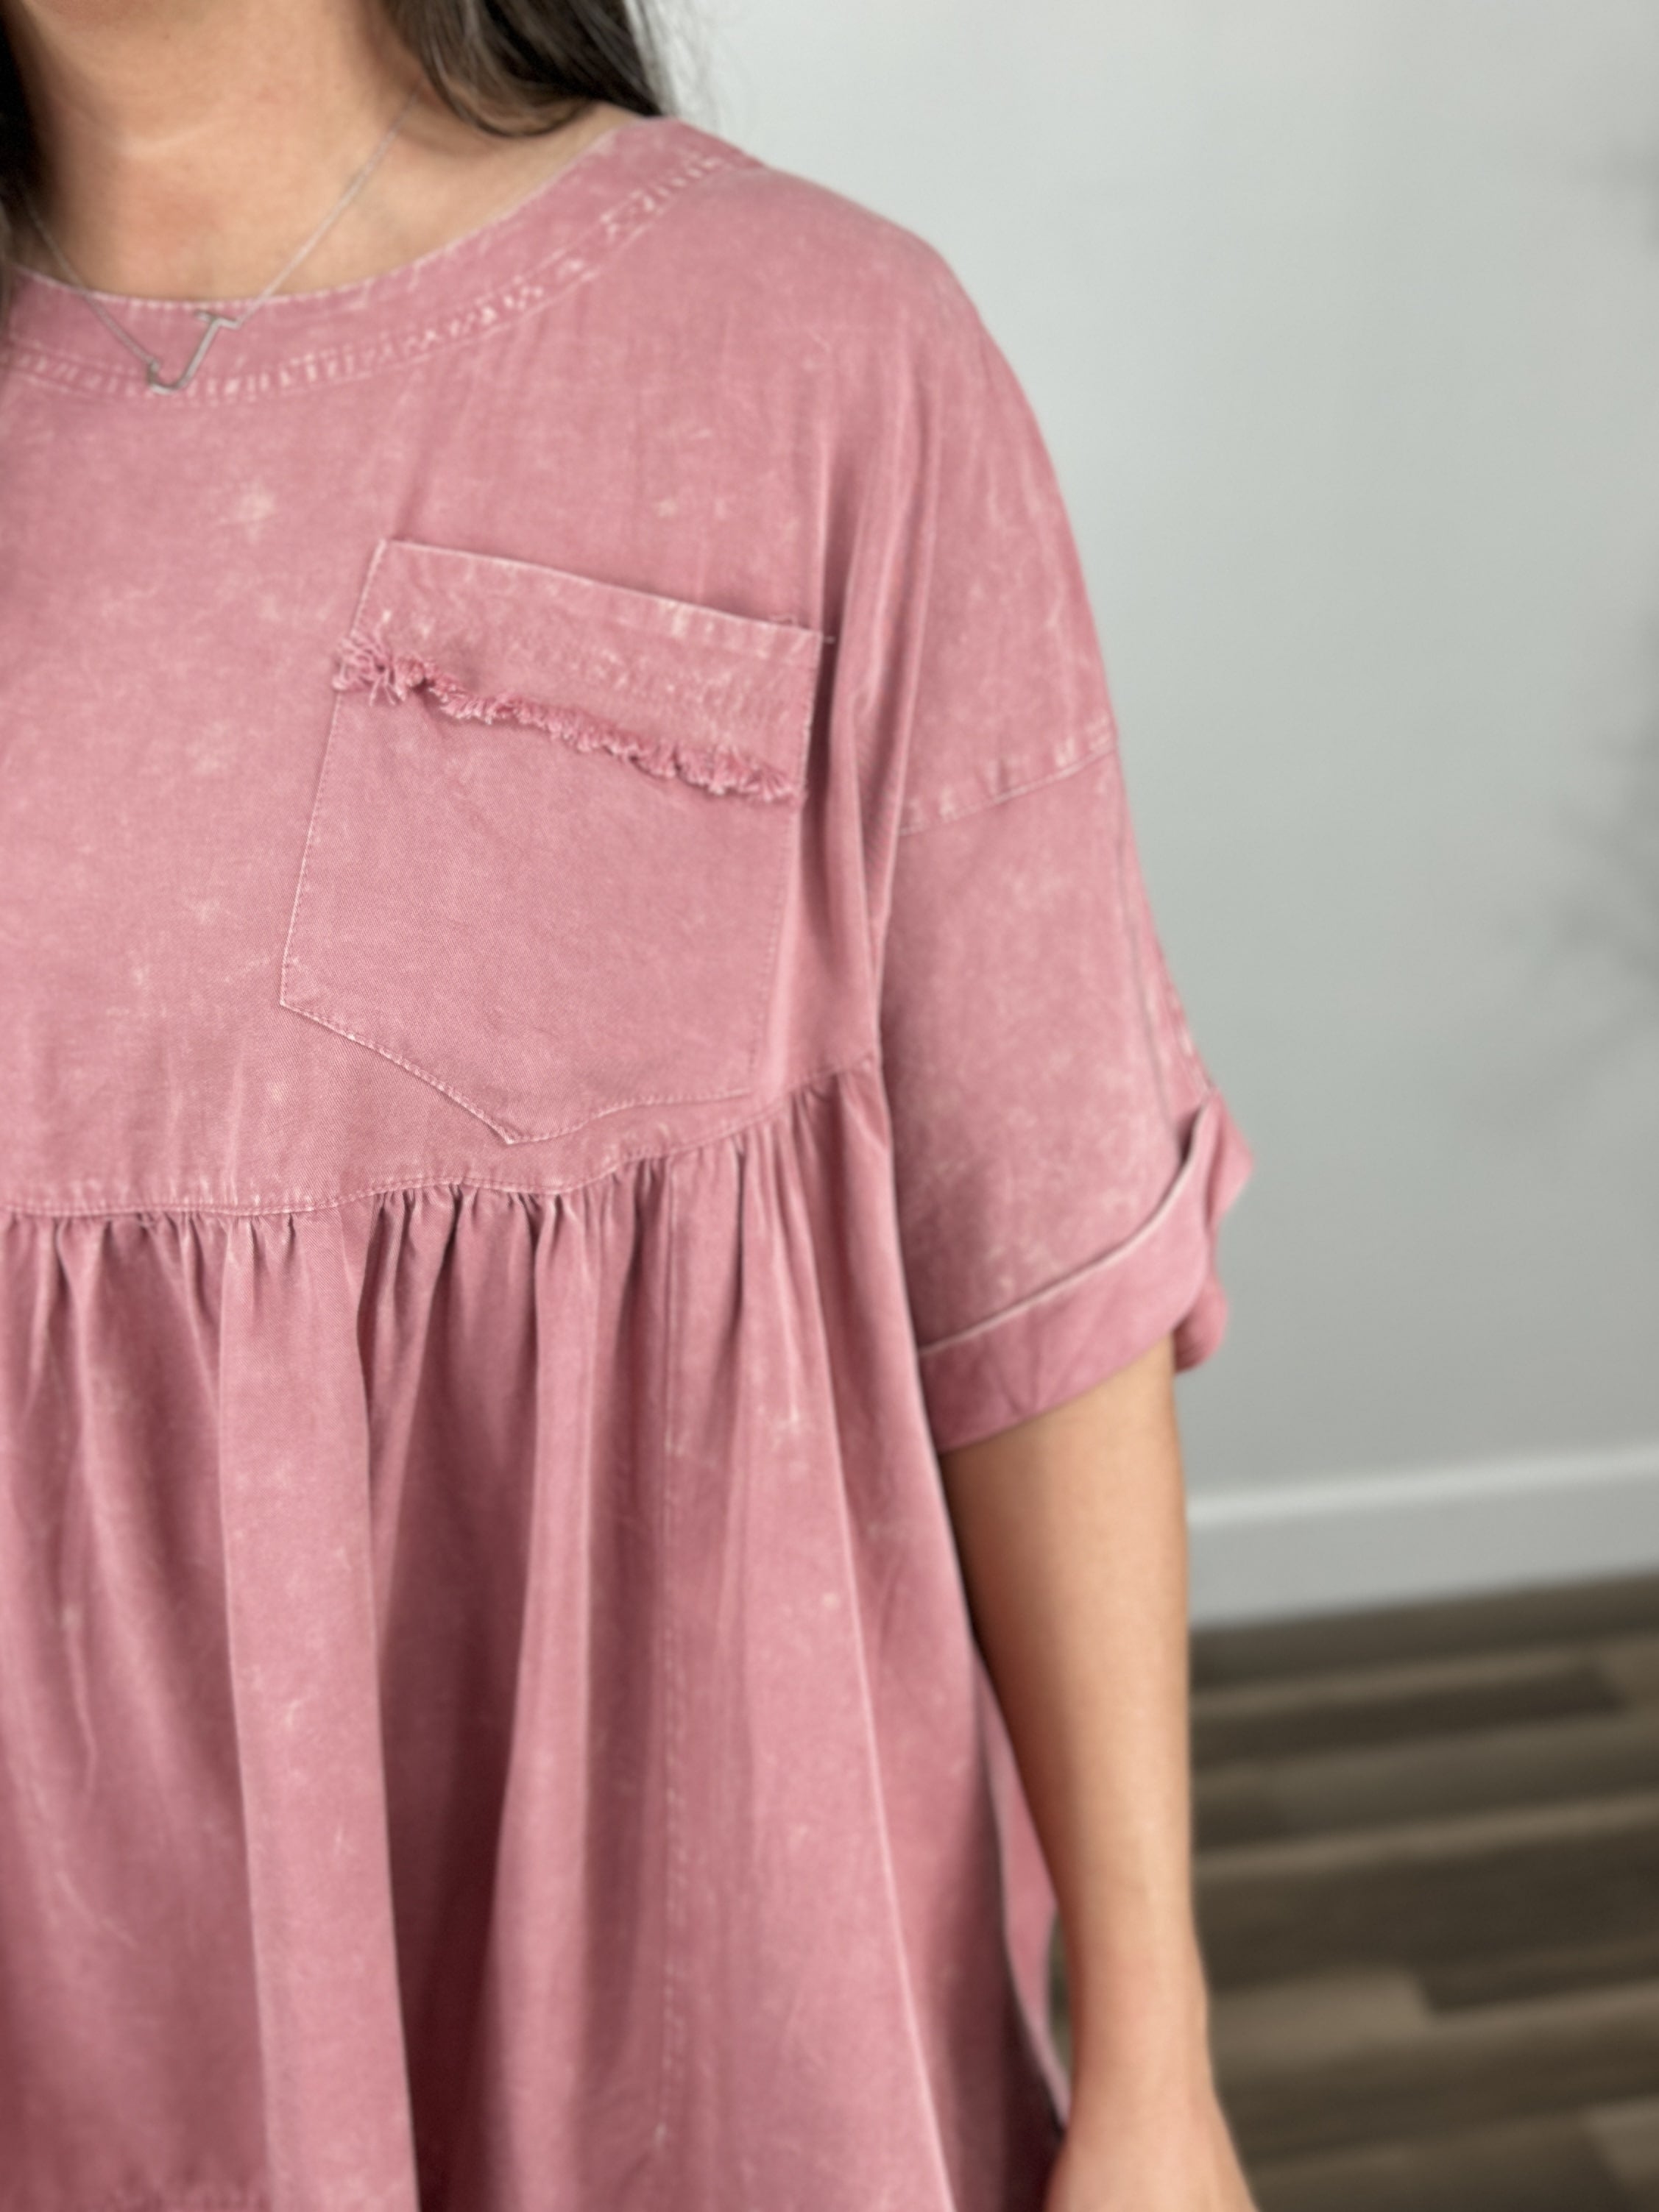 Front pocket view of the poppy oversized babydoll mineral wash top.